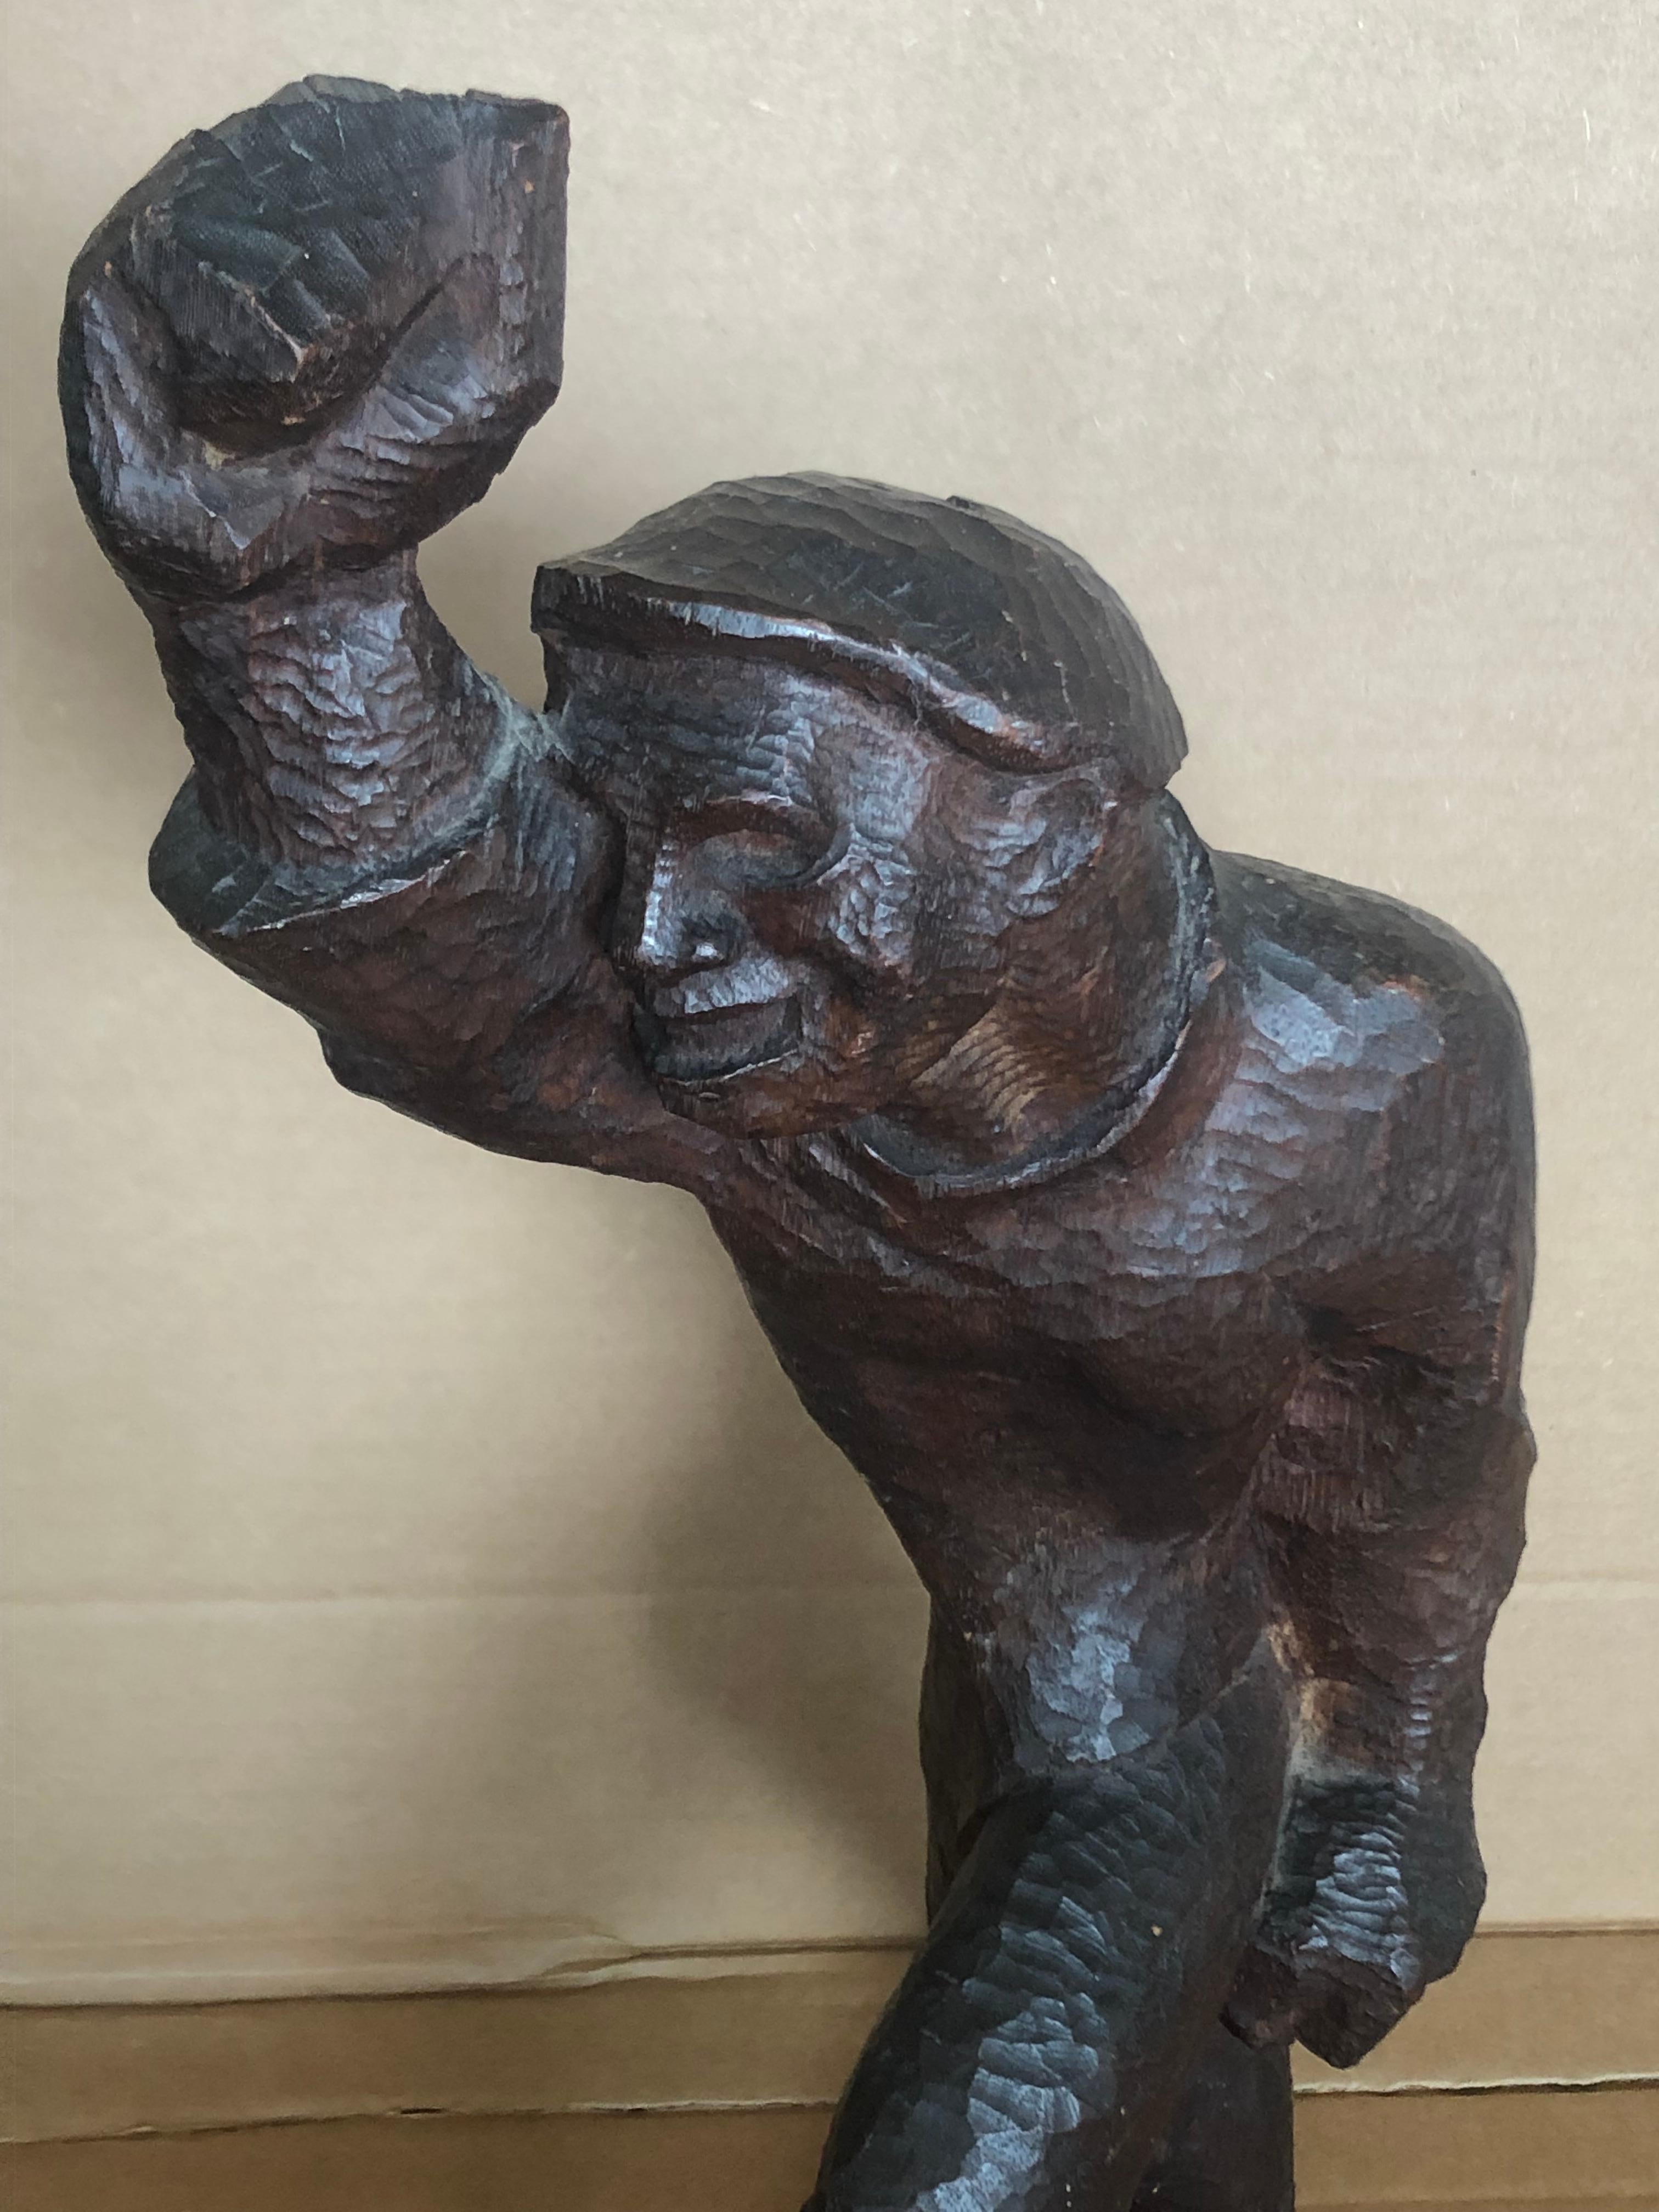 This 18 x 9 x 4 inch carved wood sculpture is unsigned and comes directly from the artist's family.

Louis 'Lou' Bunin (28 March 1904 – 17 February 1994) was an American puppeteer, artist, and pioneer of stop-motion animation in the latter half of